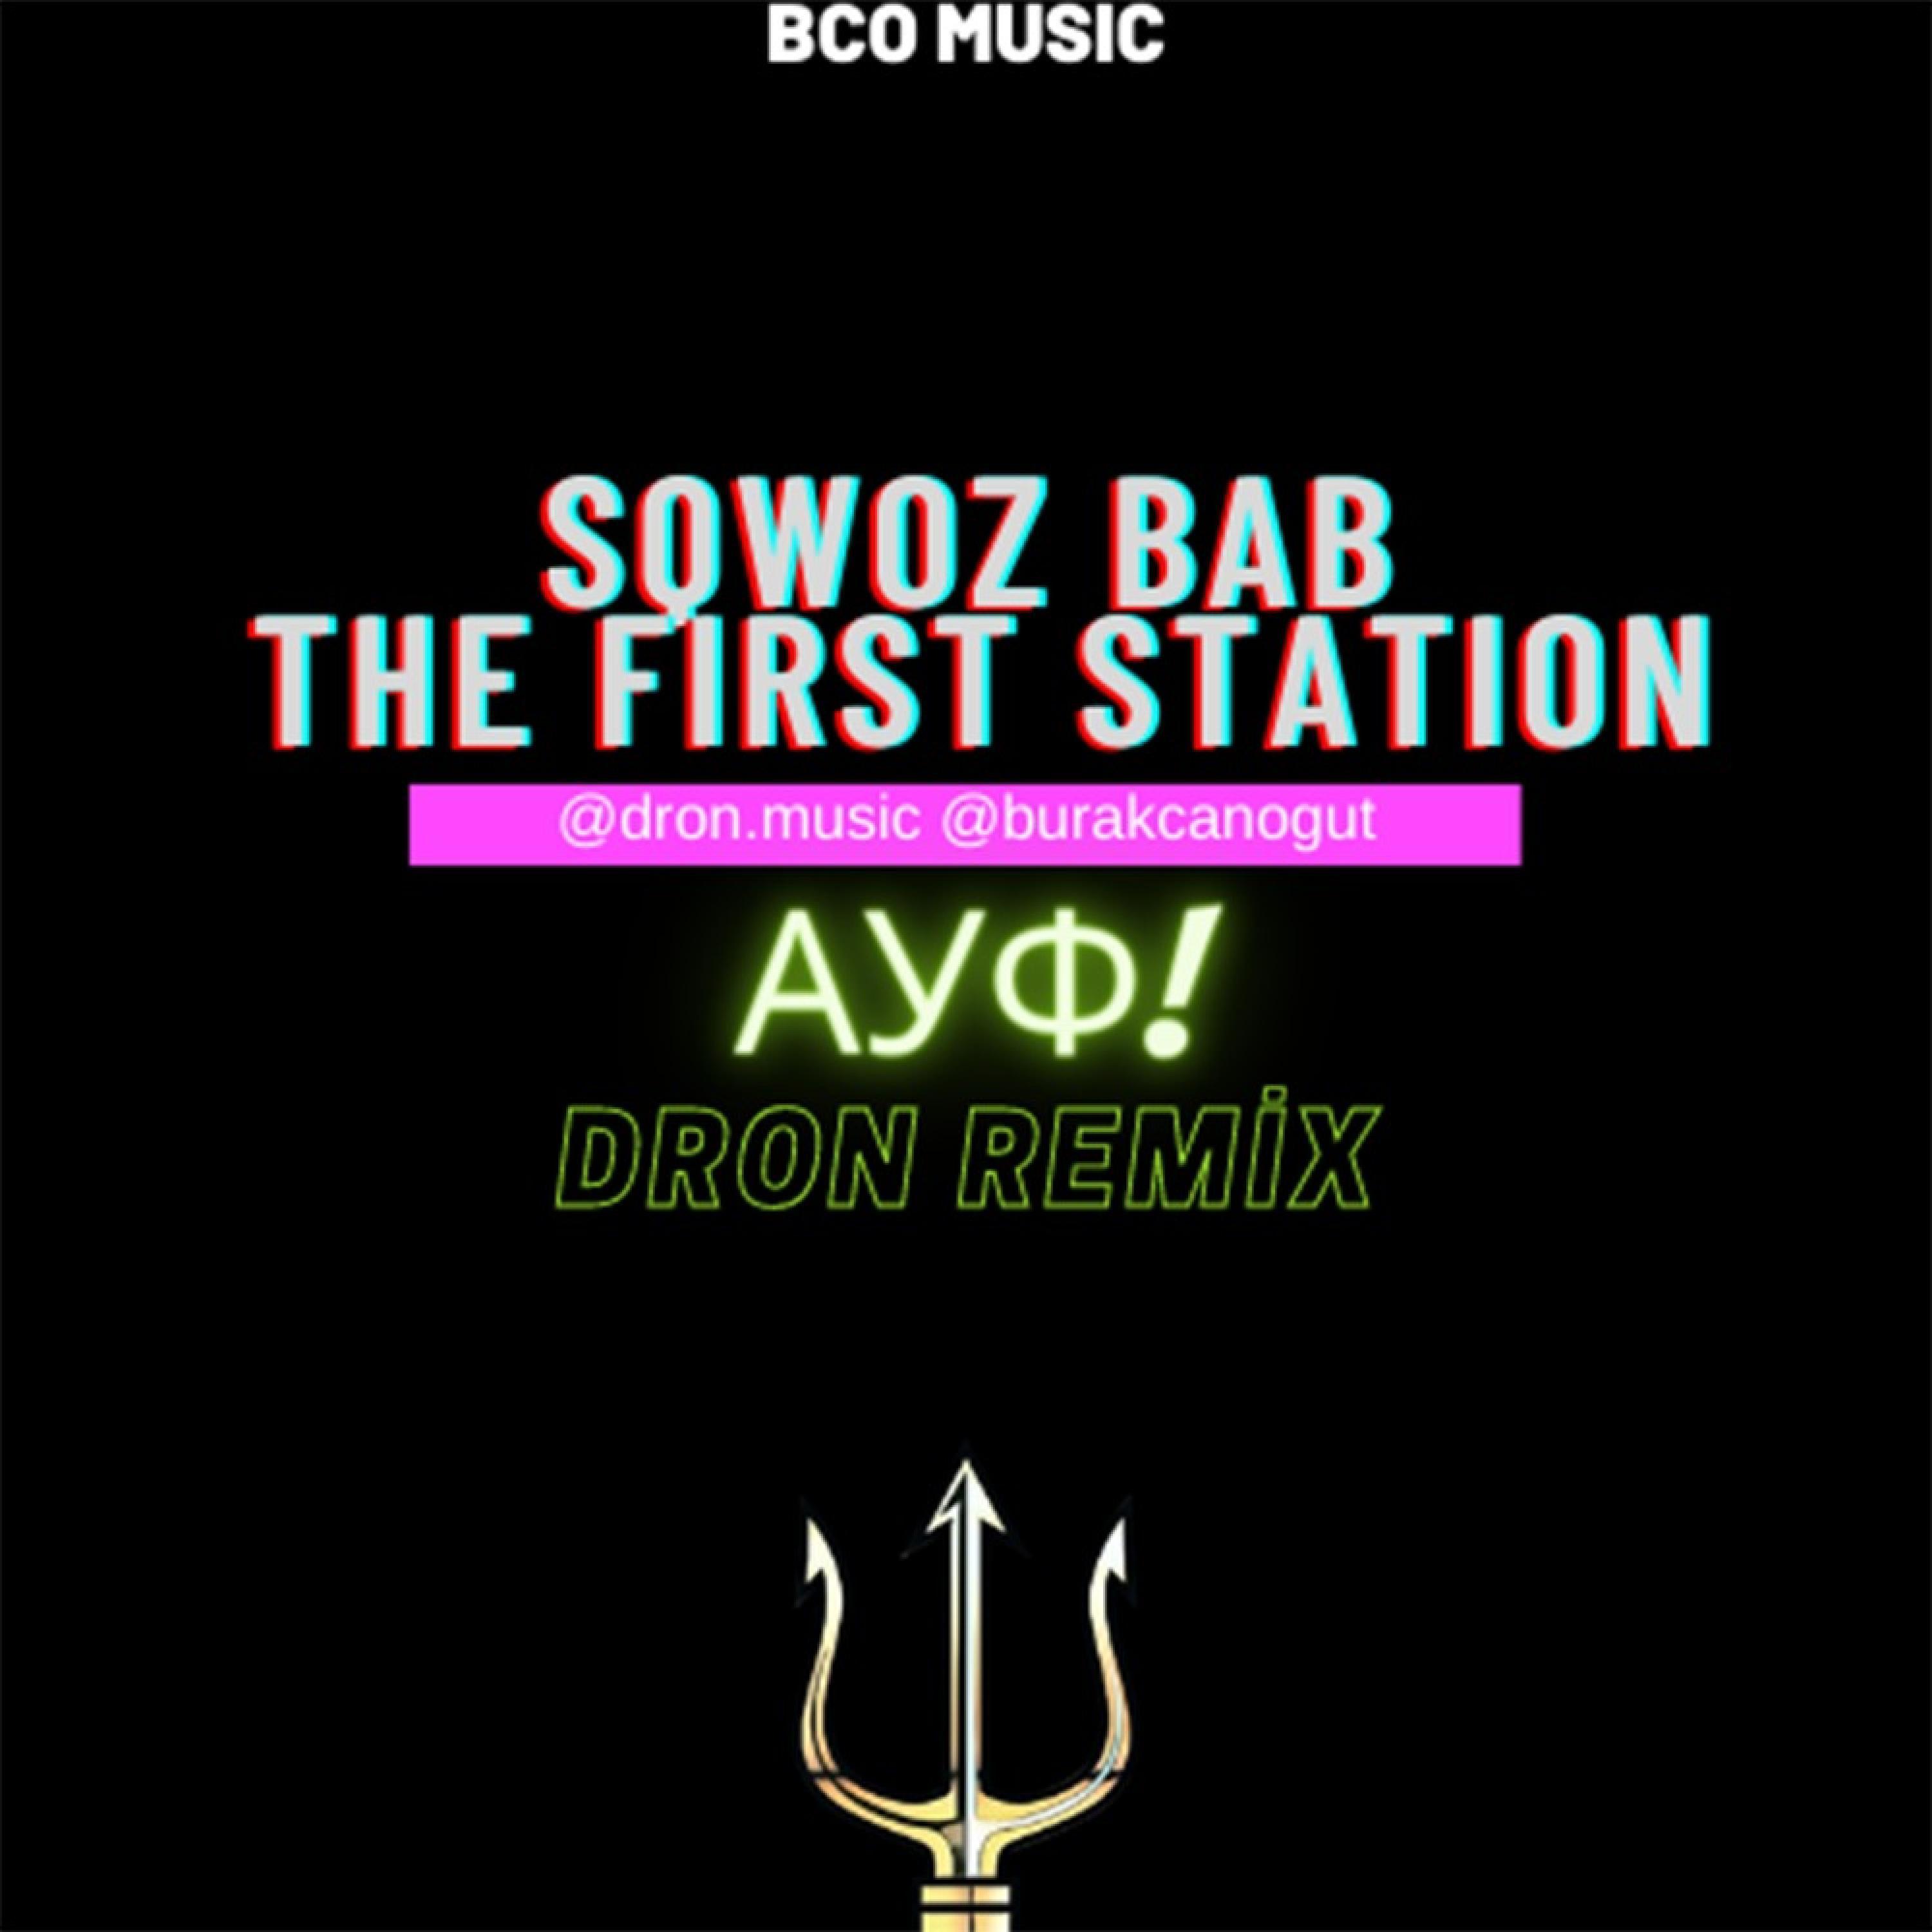 BCO Music - АУФ - SQWOZ BAB, The First Station - Dron (Remix)